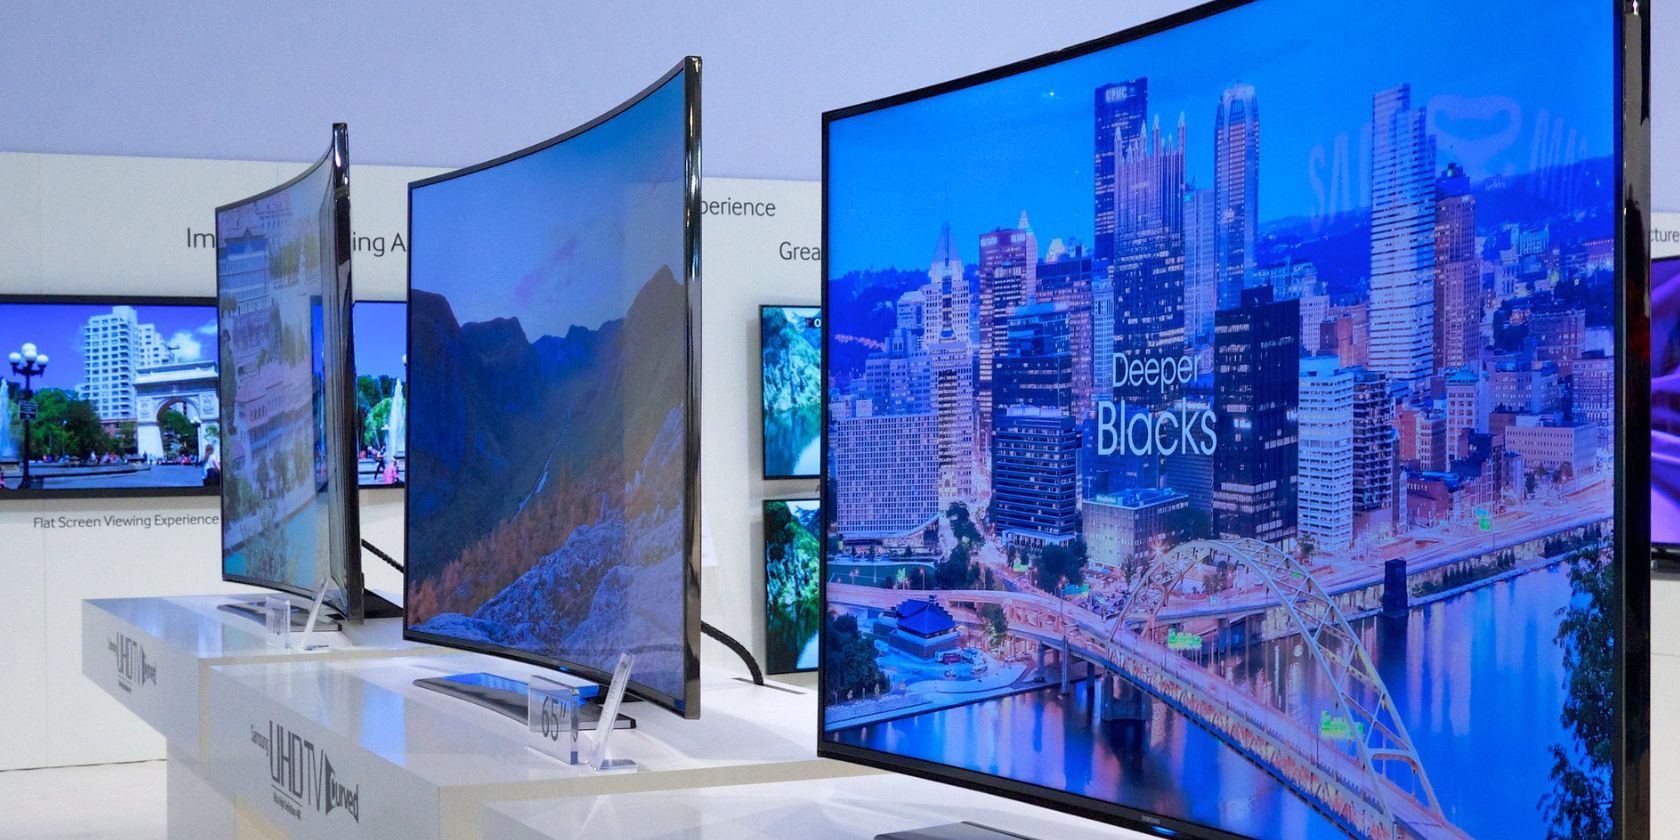 4K vs 8K: Why You Should Stick With 4K TVs (For Now)